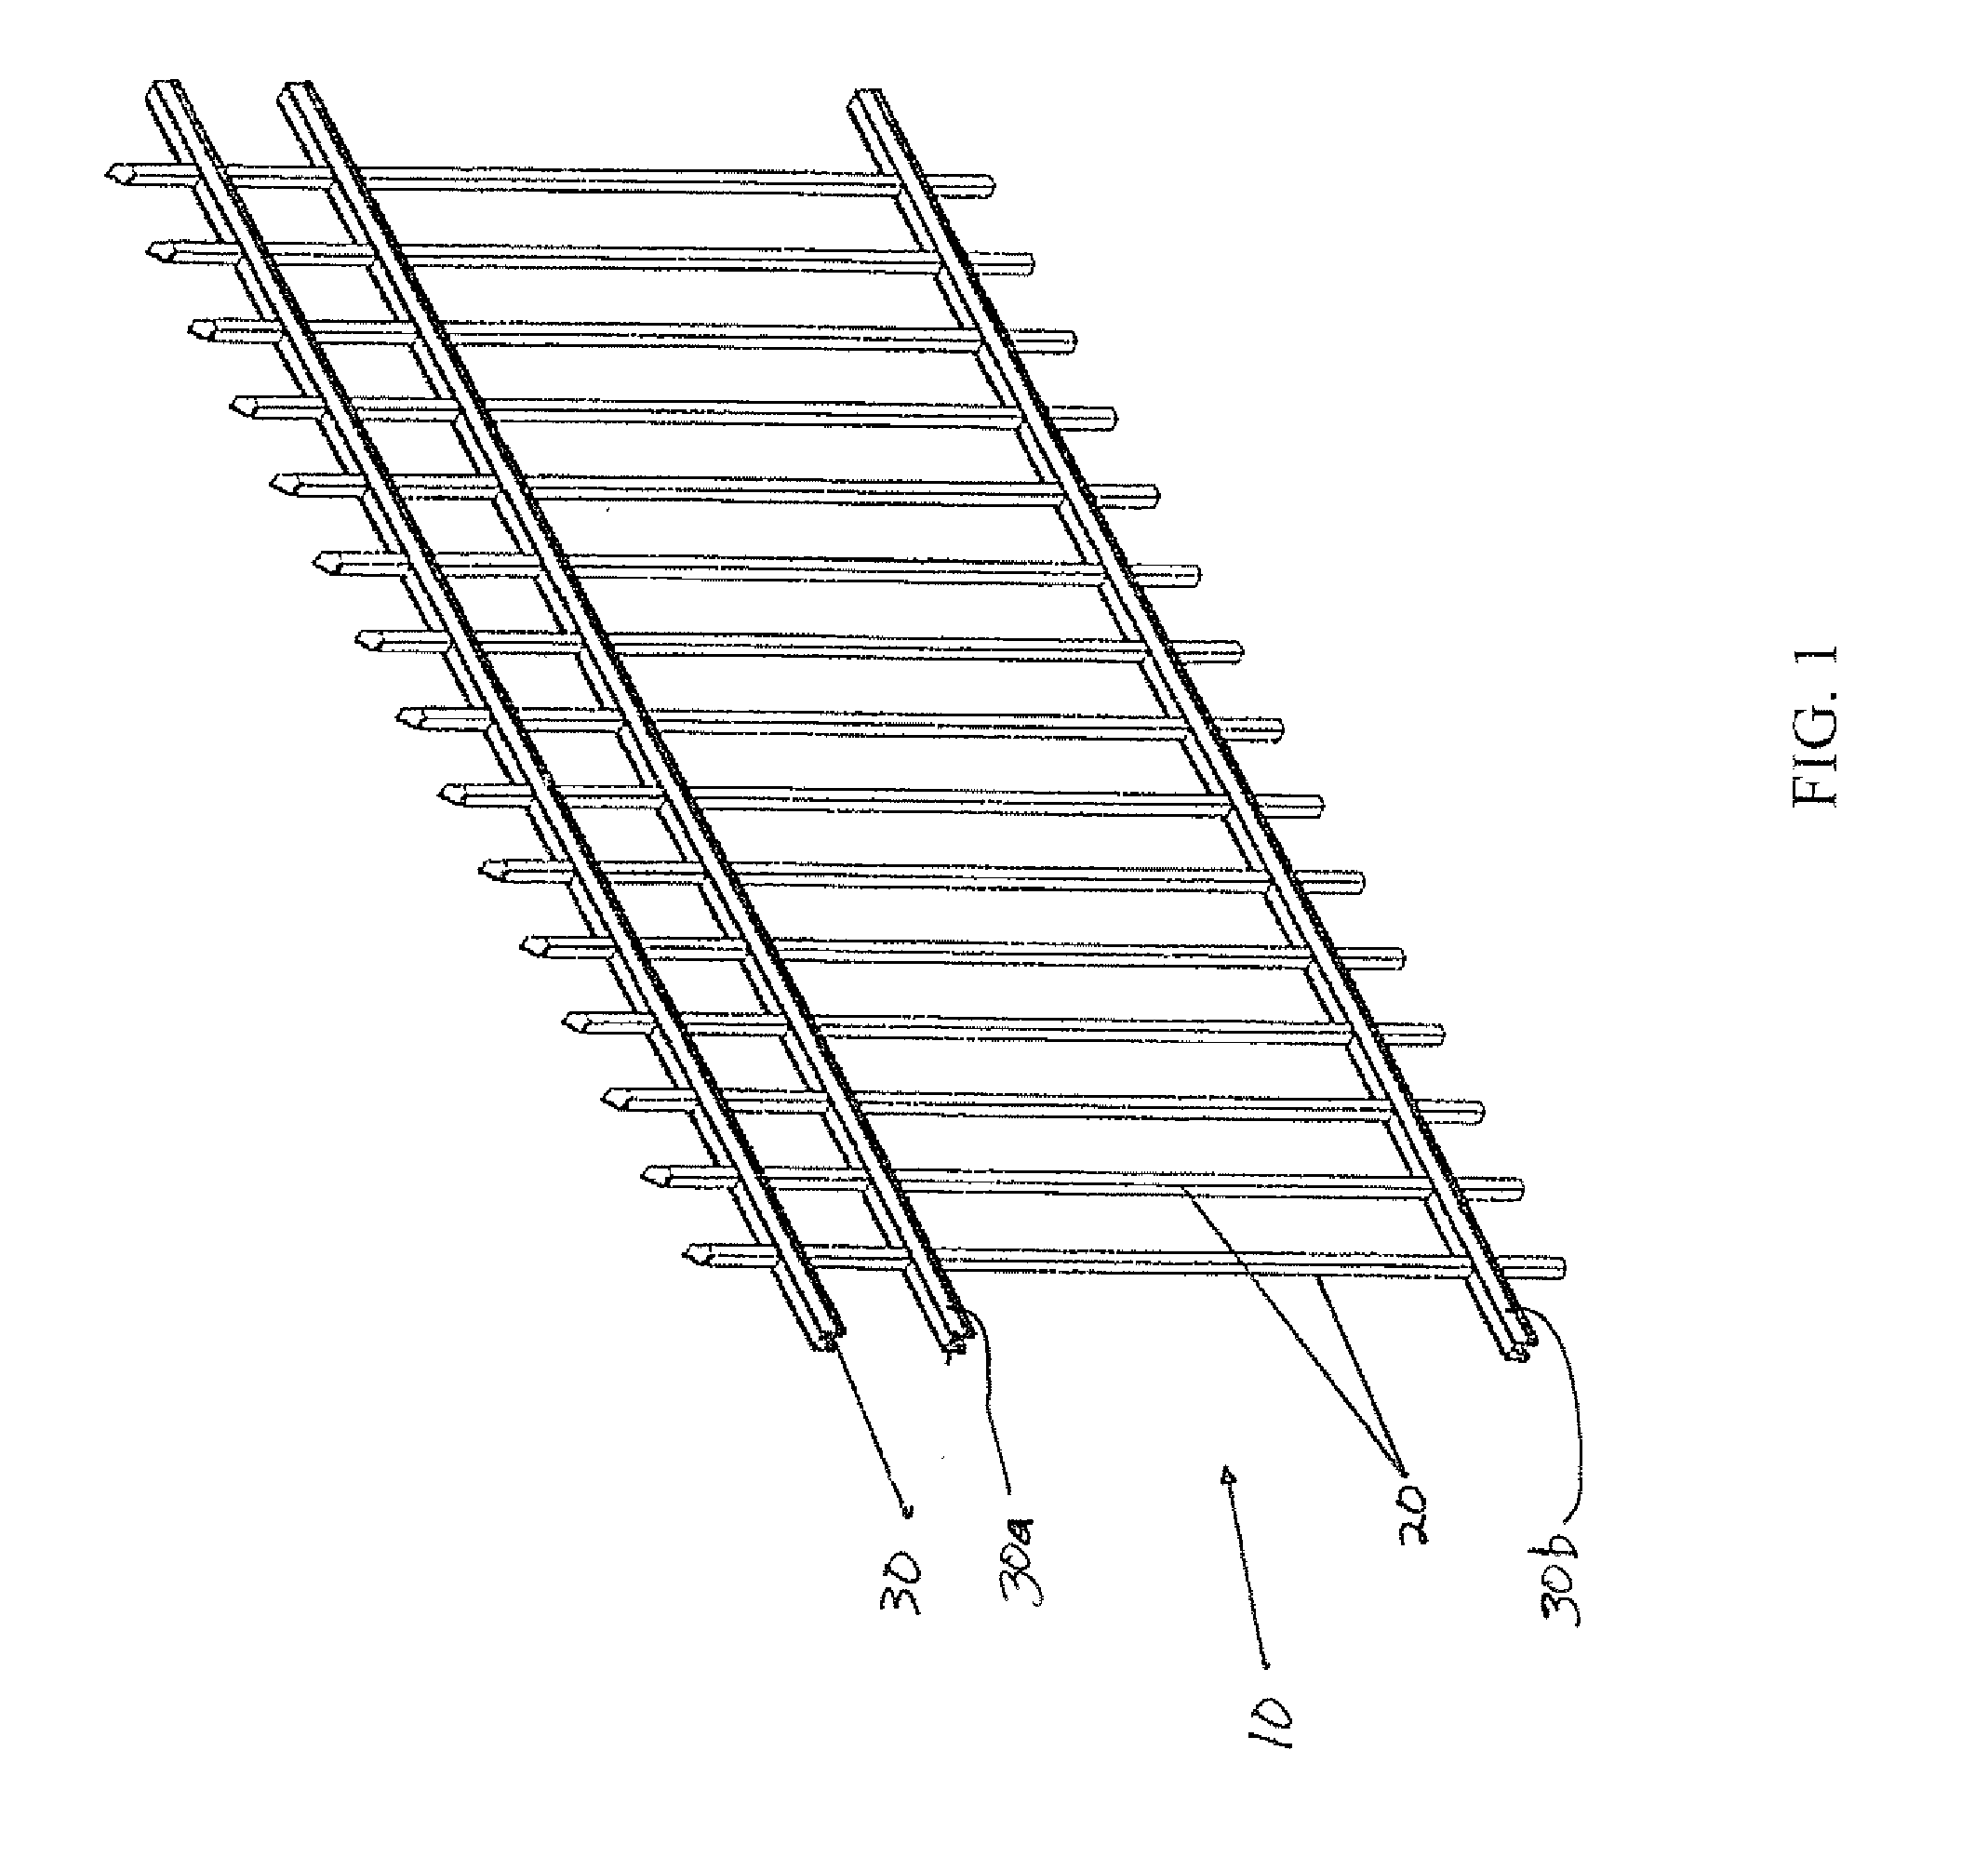 Partially pre-assembled fence assembly and mutli-element rail